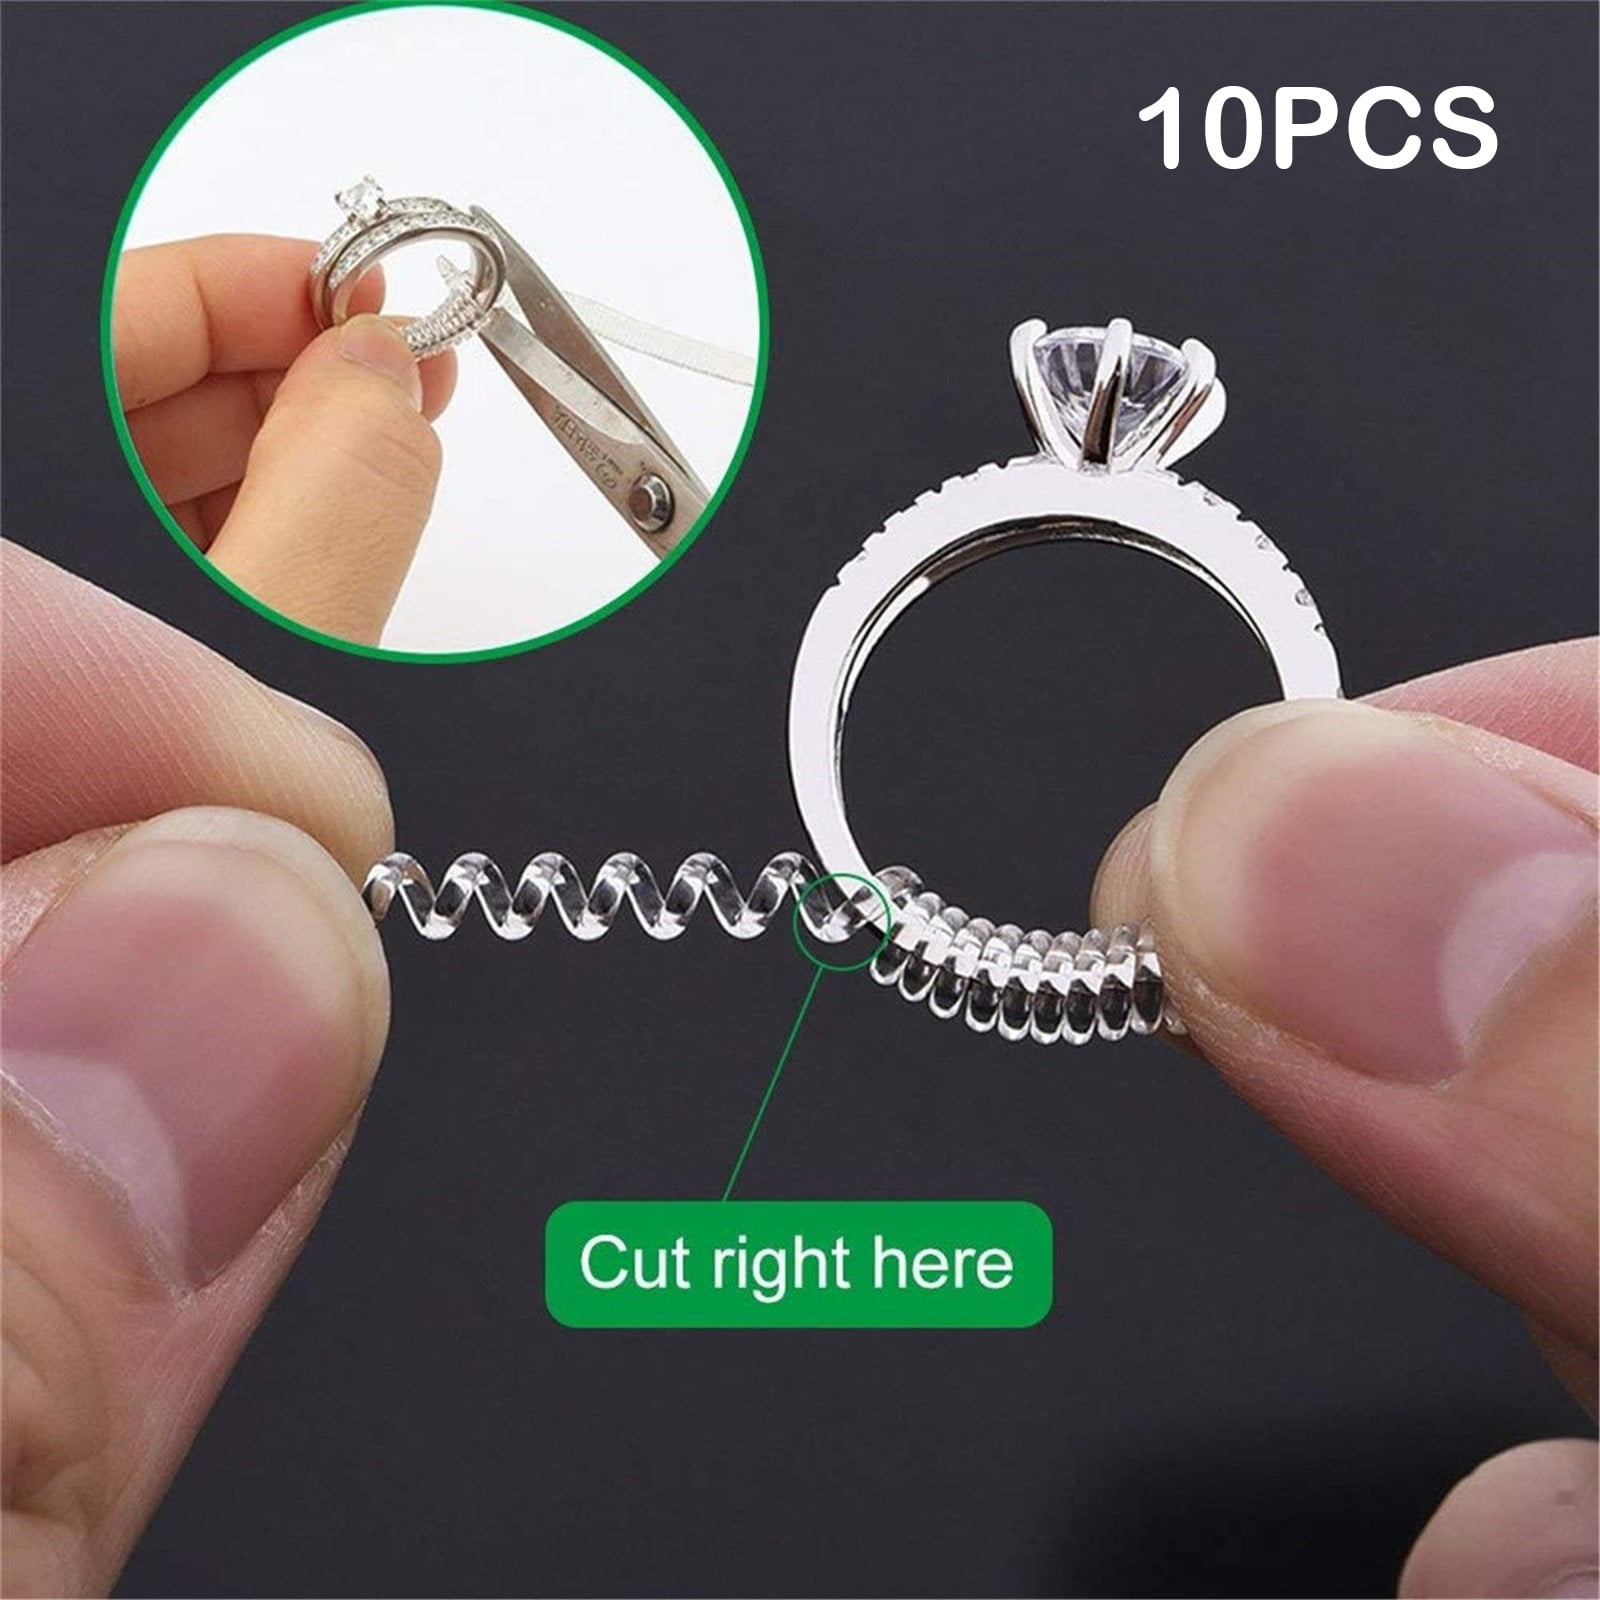 24 Packs 4 Sizes Ring Size Adjuster for Loose Rings - Invisible Spiral